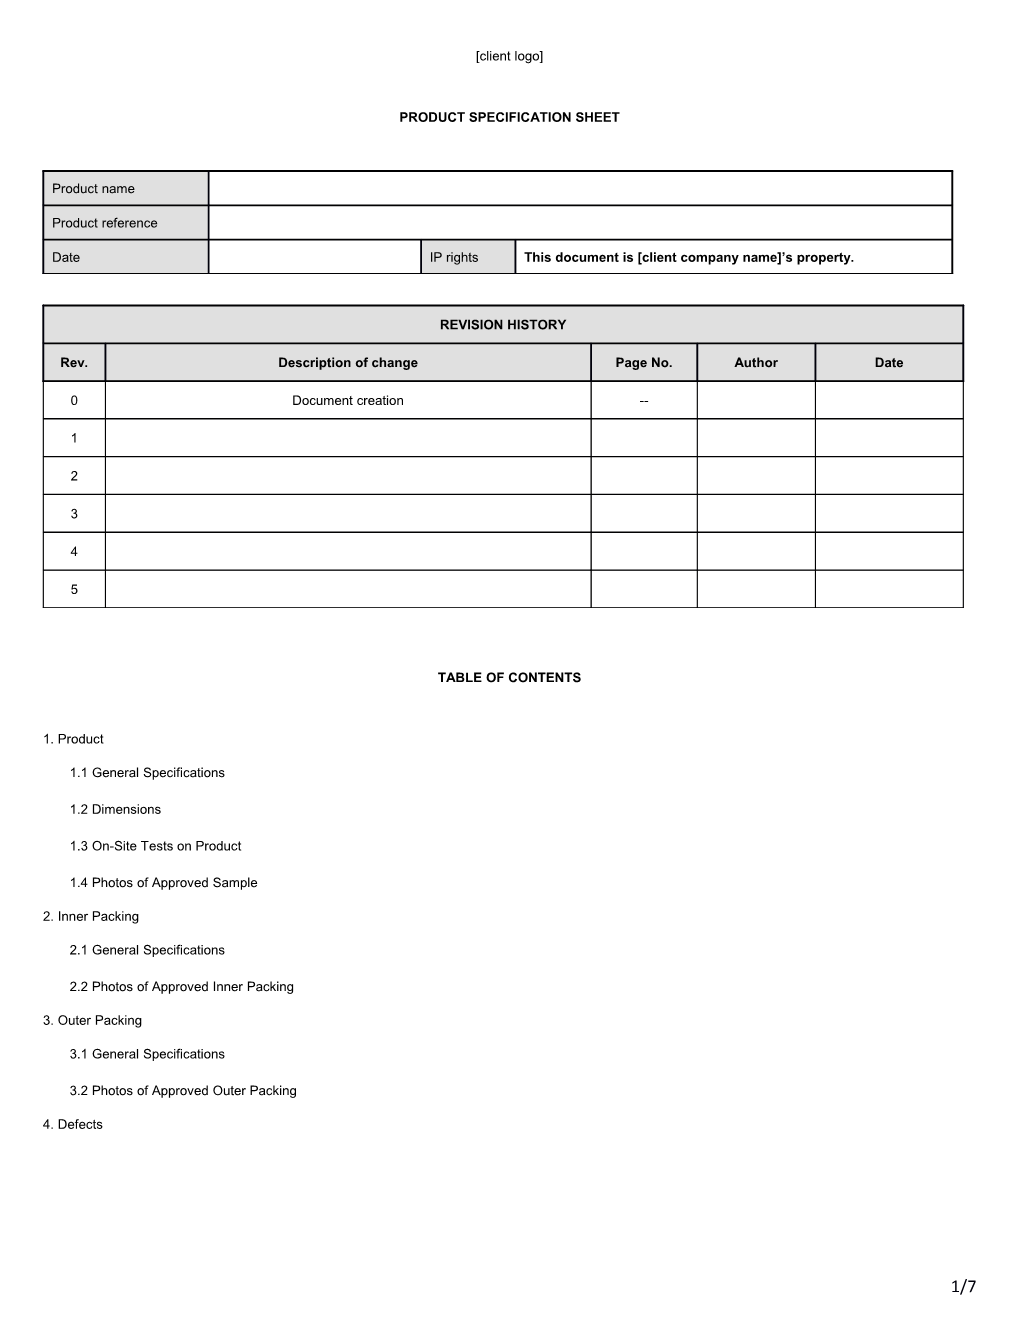 Product Specification Sheet s1